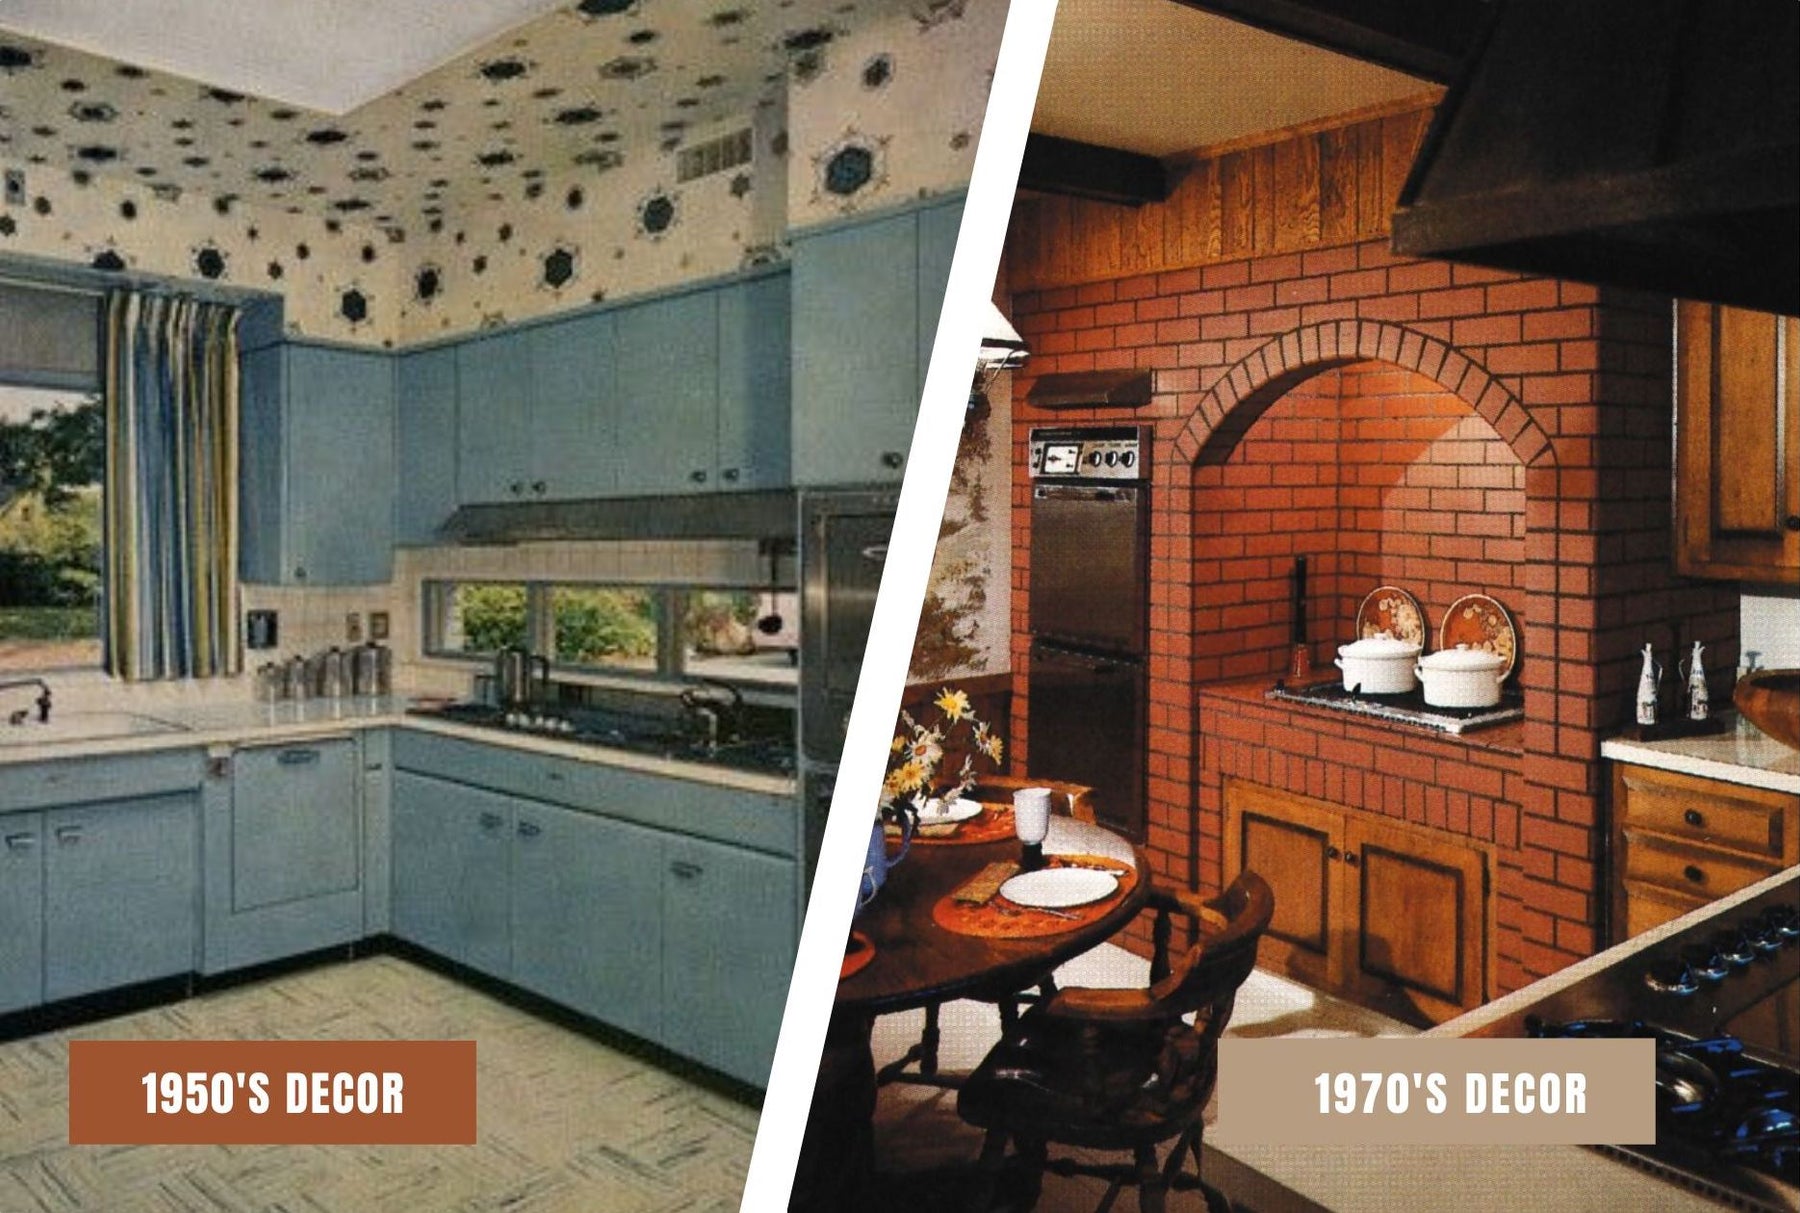 1950's Decor Vs. 1970's Vintage Decor - The Difference - The Handmade Store